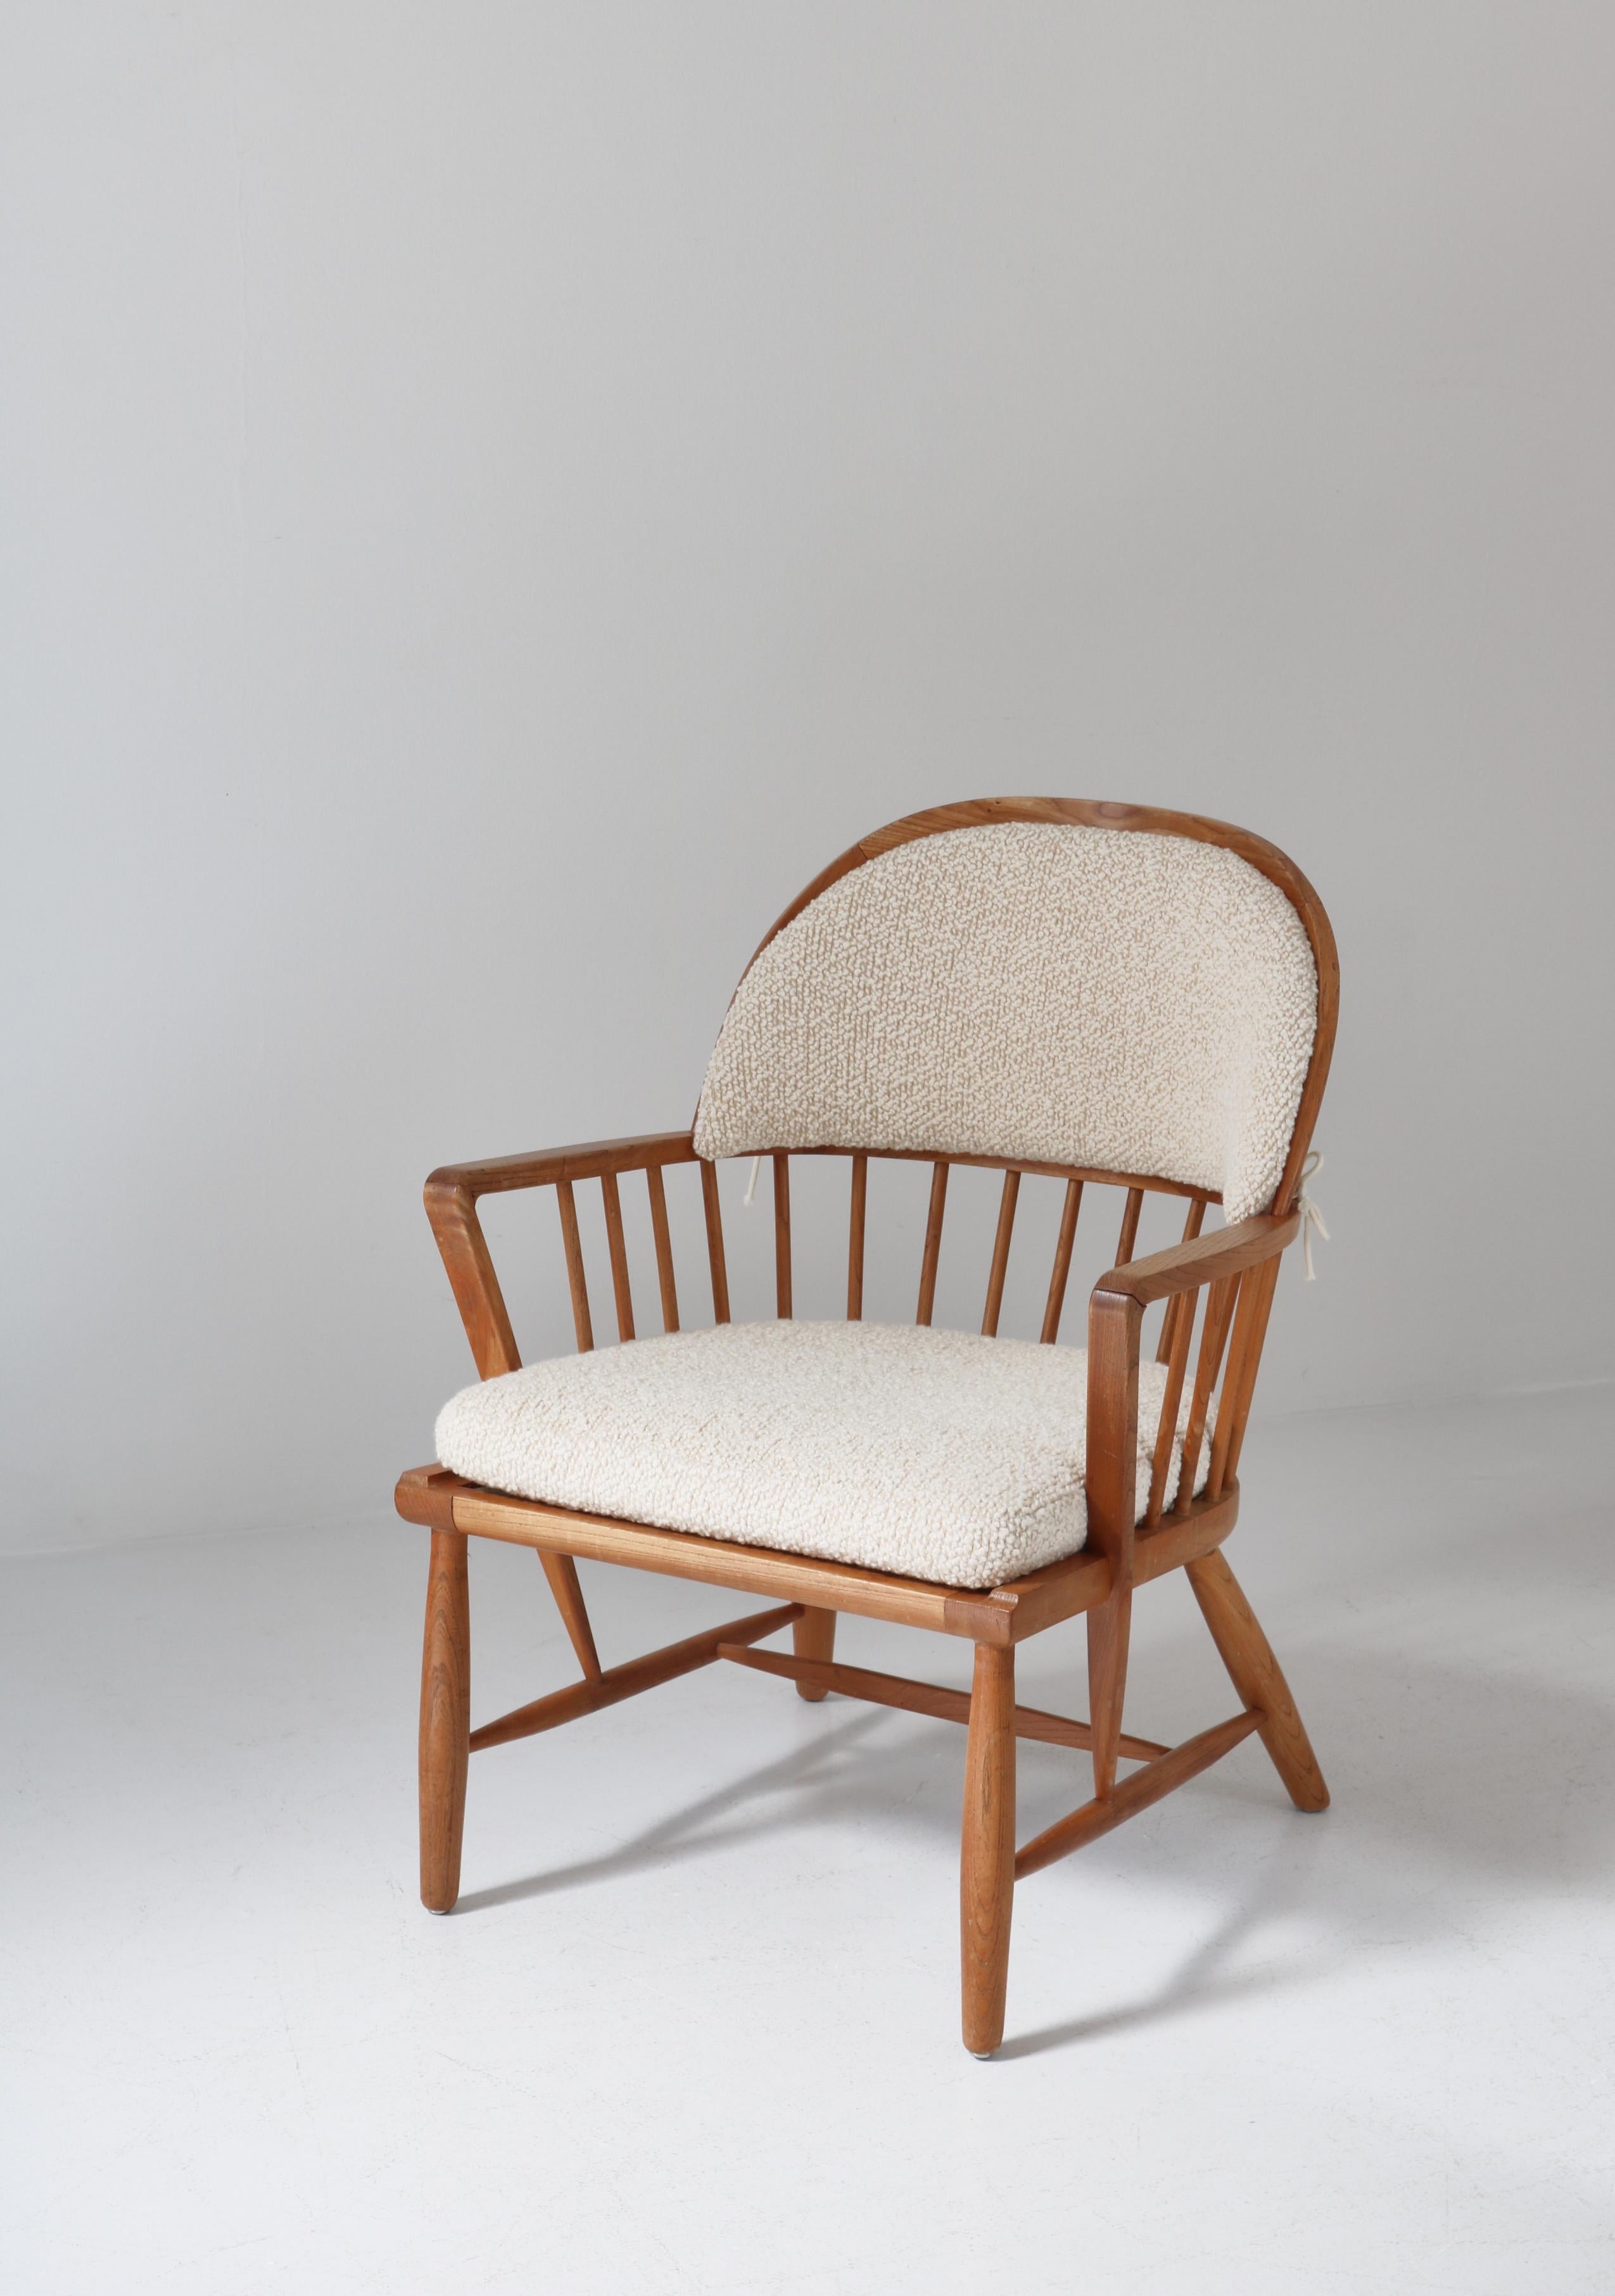 Scandinavian Modern Windsor Chair in Patinated Ash and White Bouclé, 1940s In Good Condition For Sale In Odense, DK